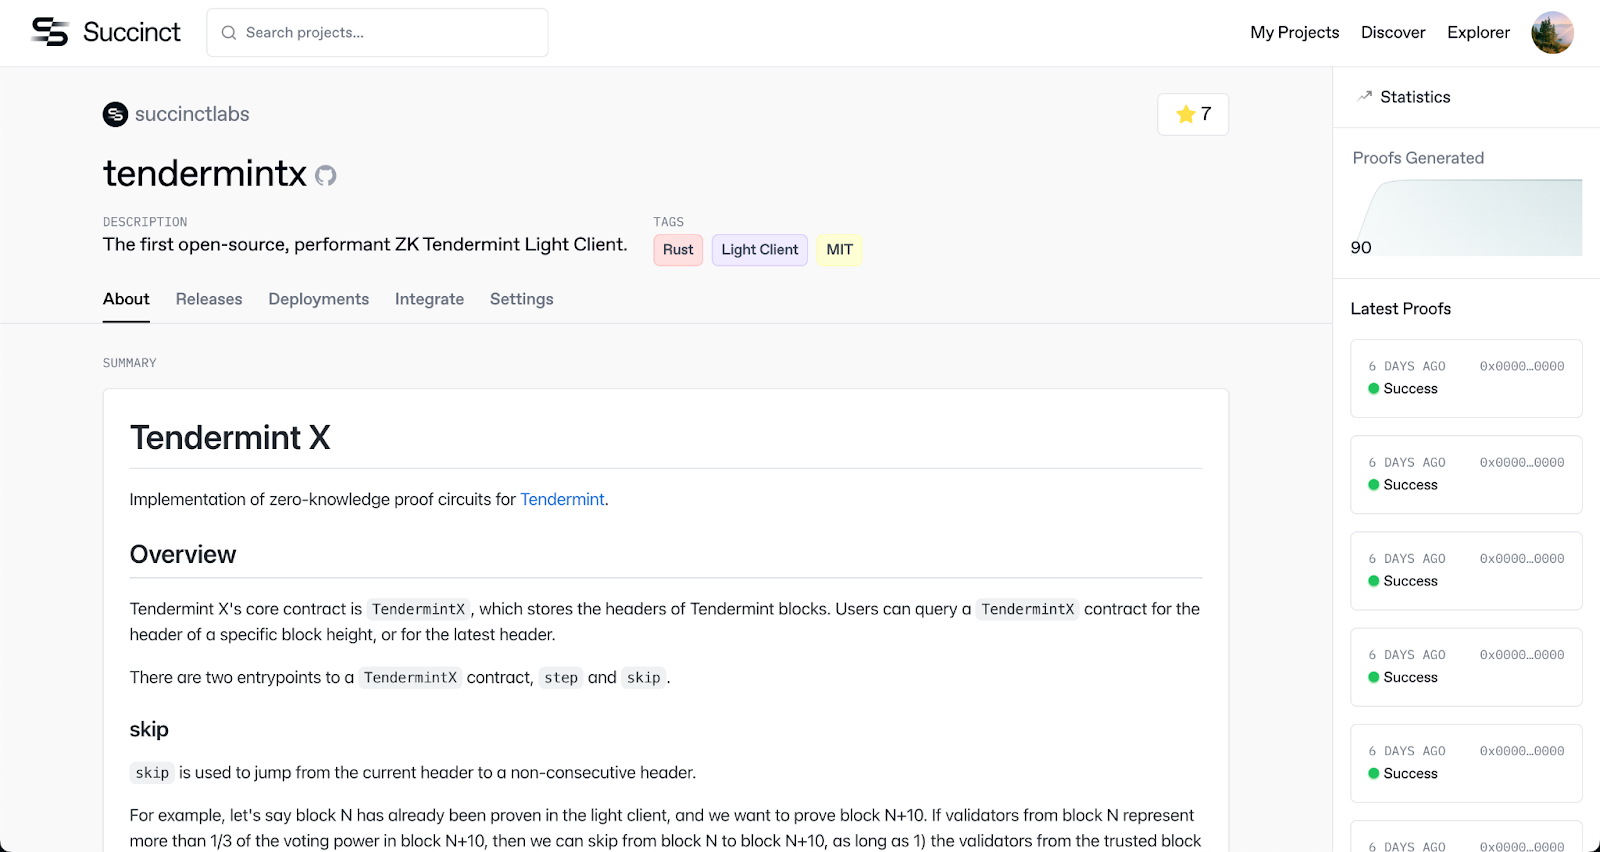 Tendermint X: The first open-source, performant ZK Tendermint light client built with Succinct